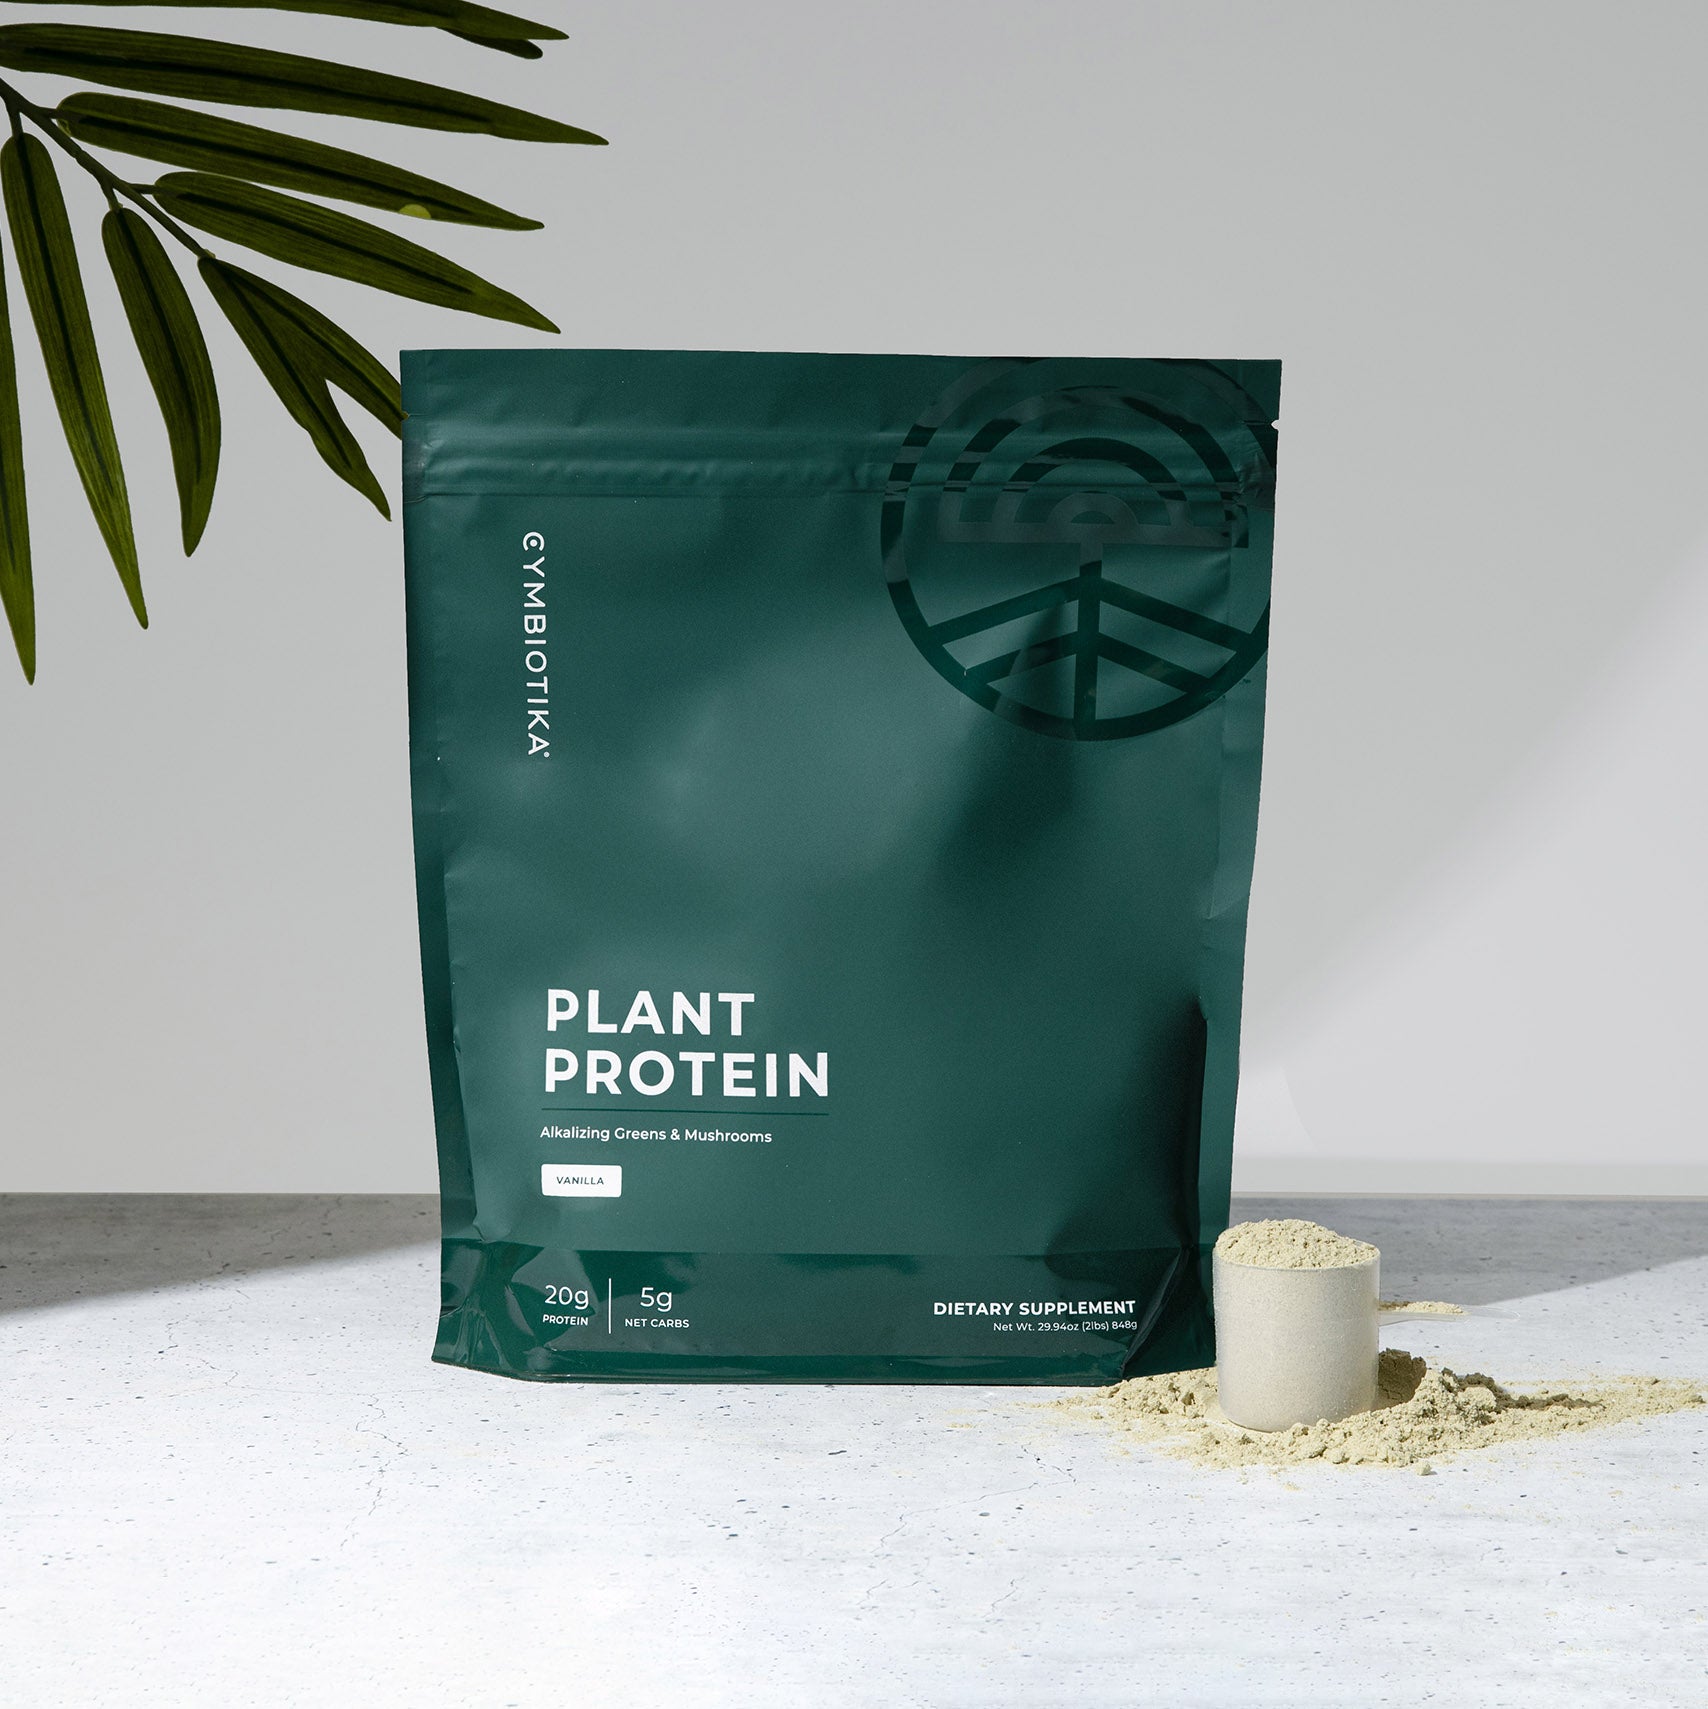 Plant Protein Bag Next to Scoop of Protein